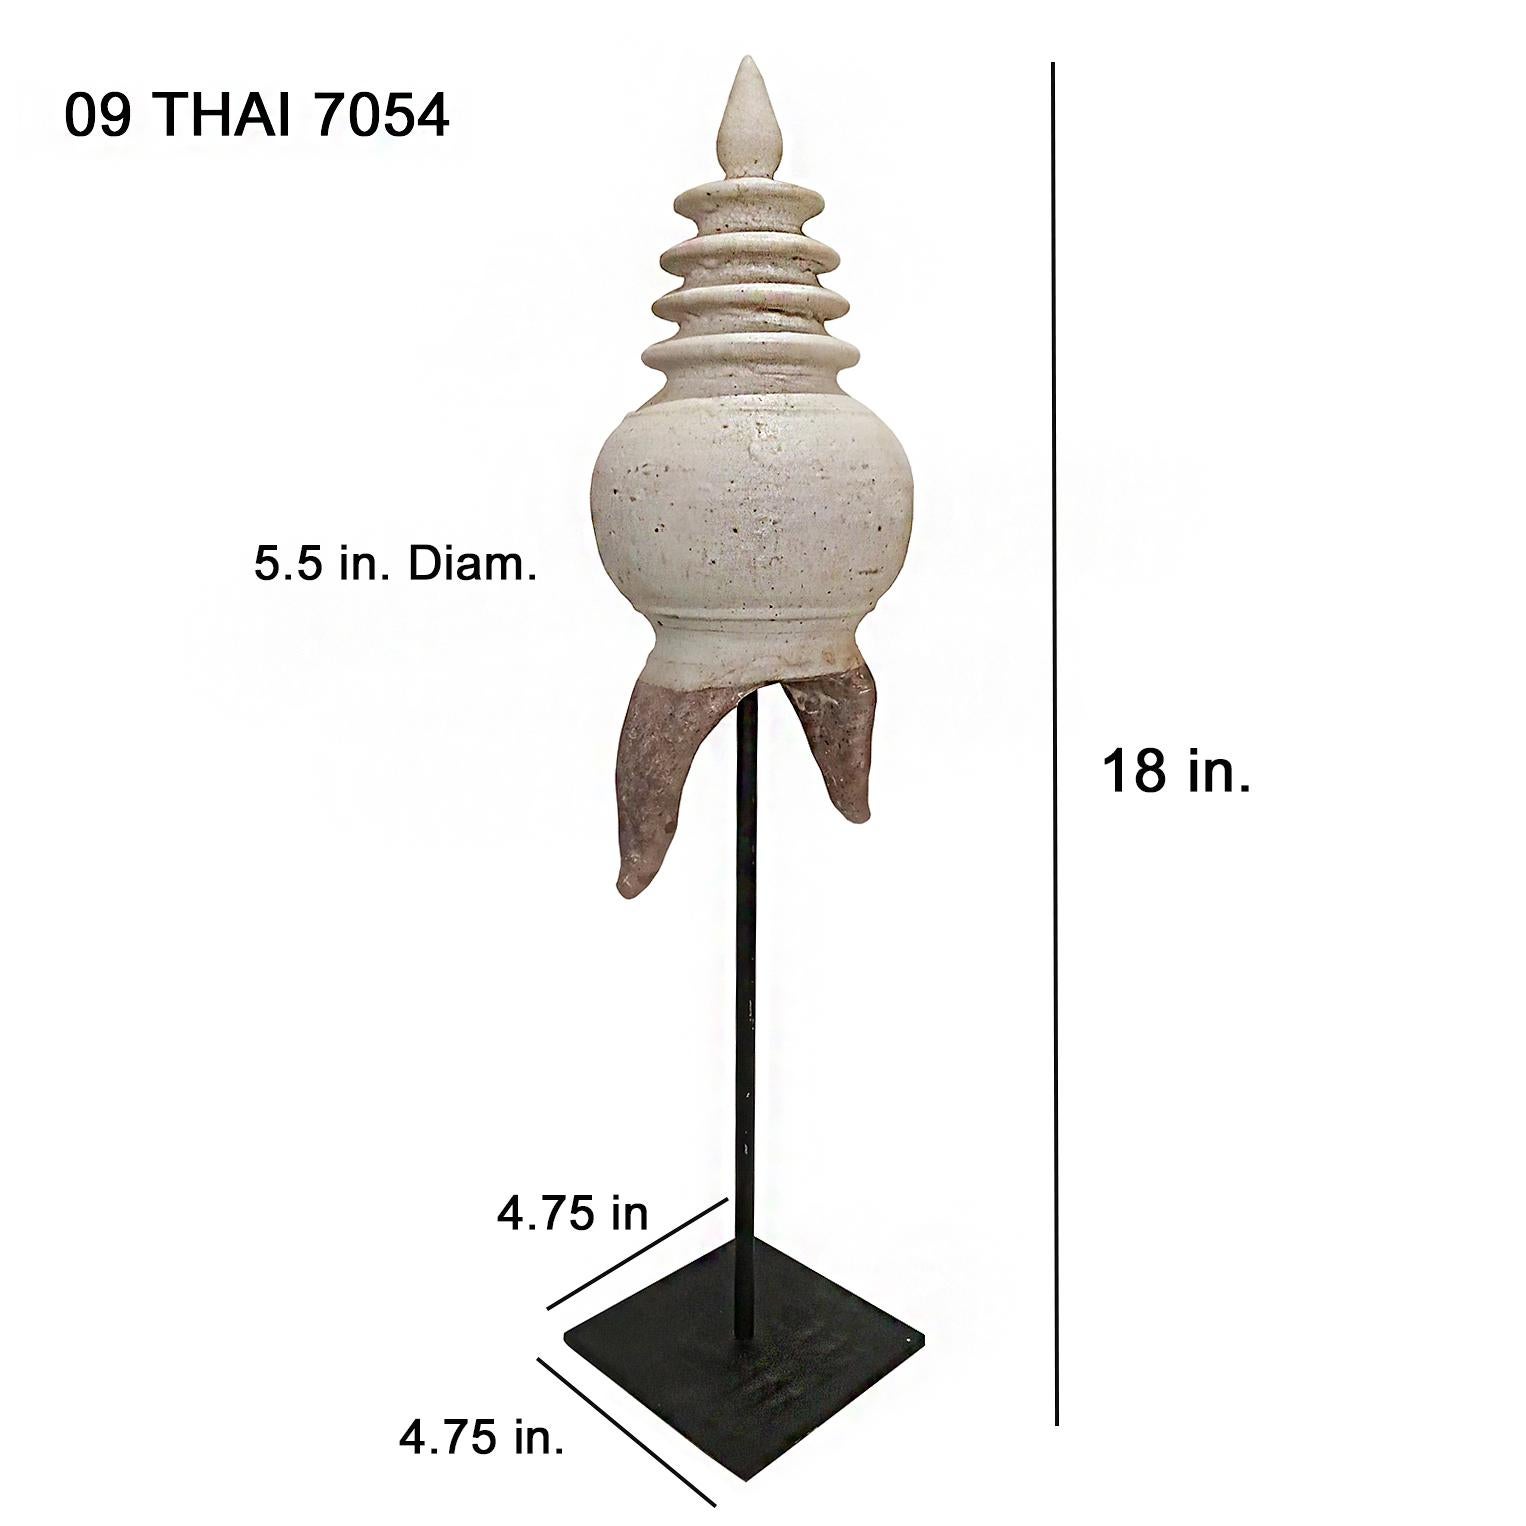 A selection of Stupa architectural details from Thailand, late 20th century, handcrafted in traditional Thai clay earthenware, with a glazed beige flat finish. 

Symbolizing enlightenment, The Stupa shape represents one of the most ancient and